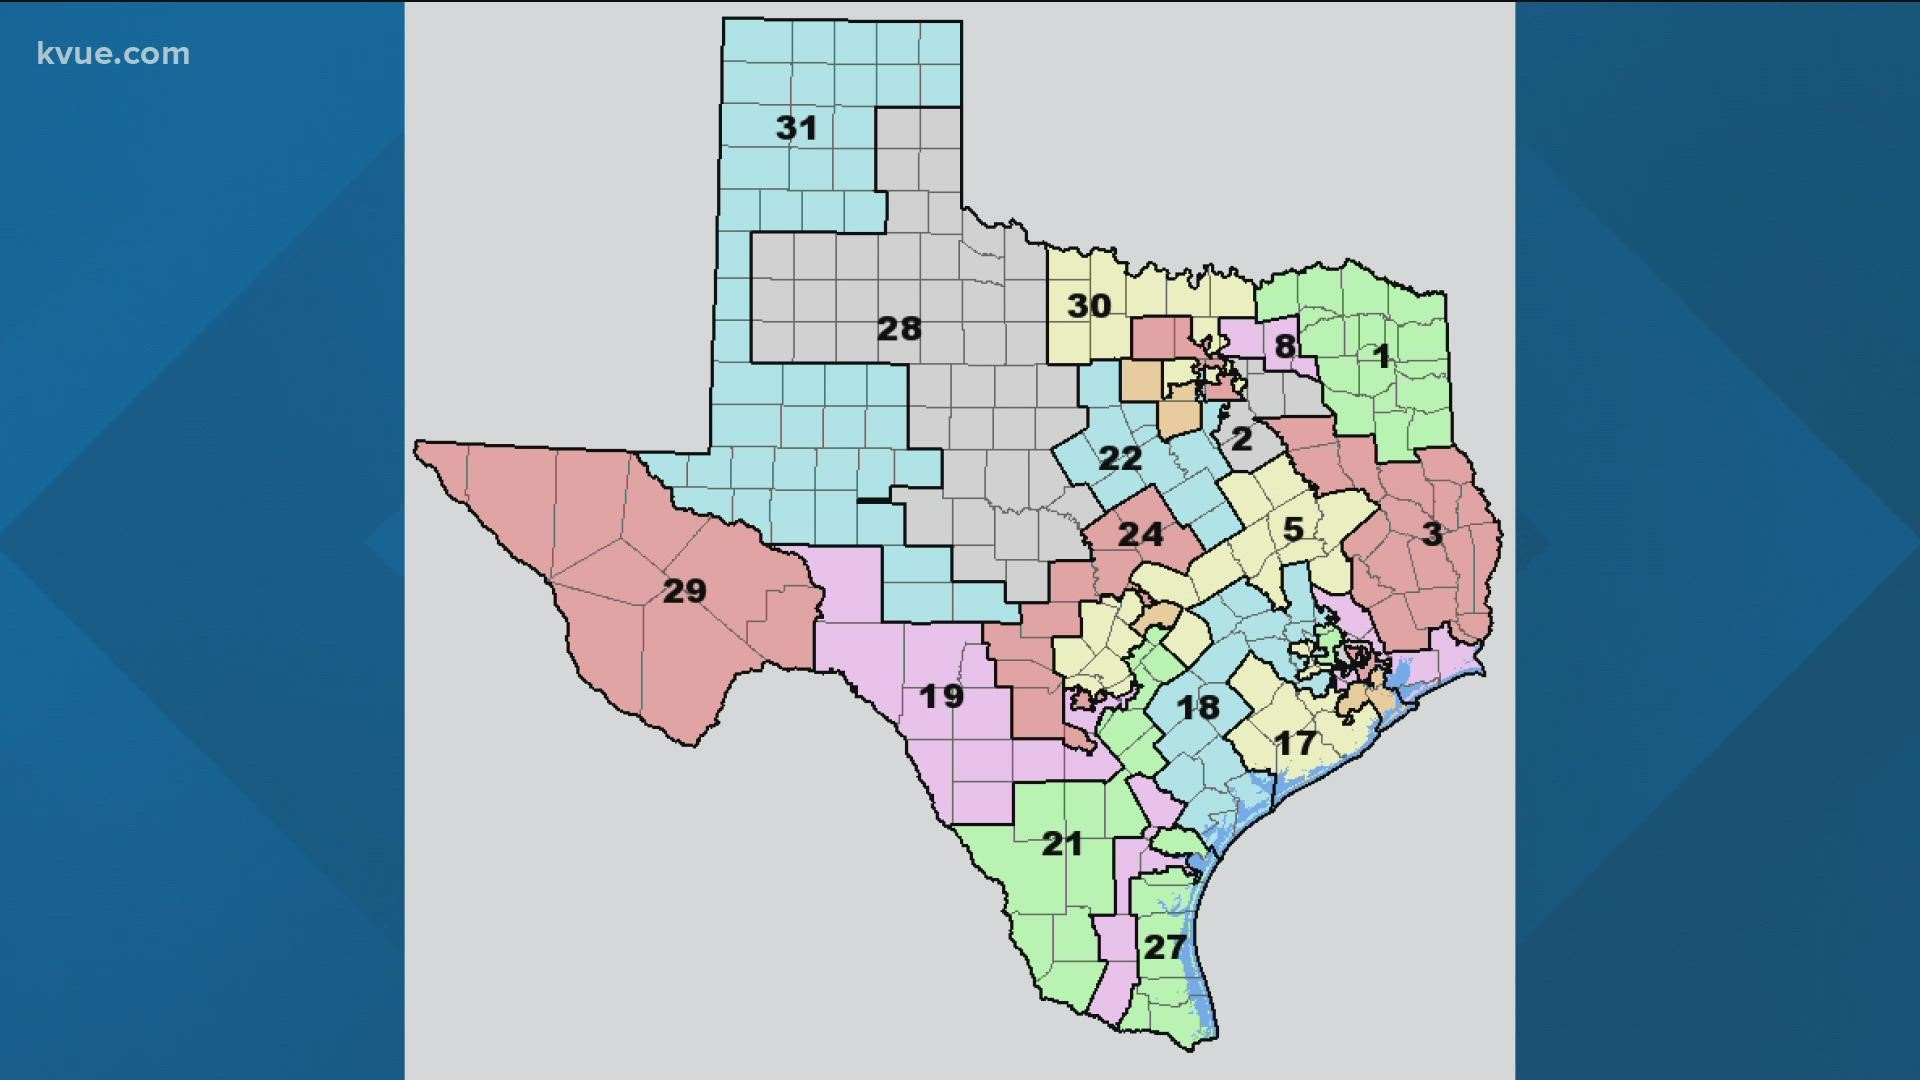 The Texas legislature is working to draw new districts in this special session. For some neighborhoods, the maps could look strange.